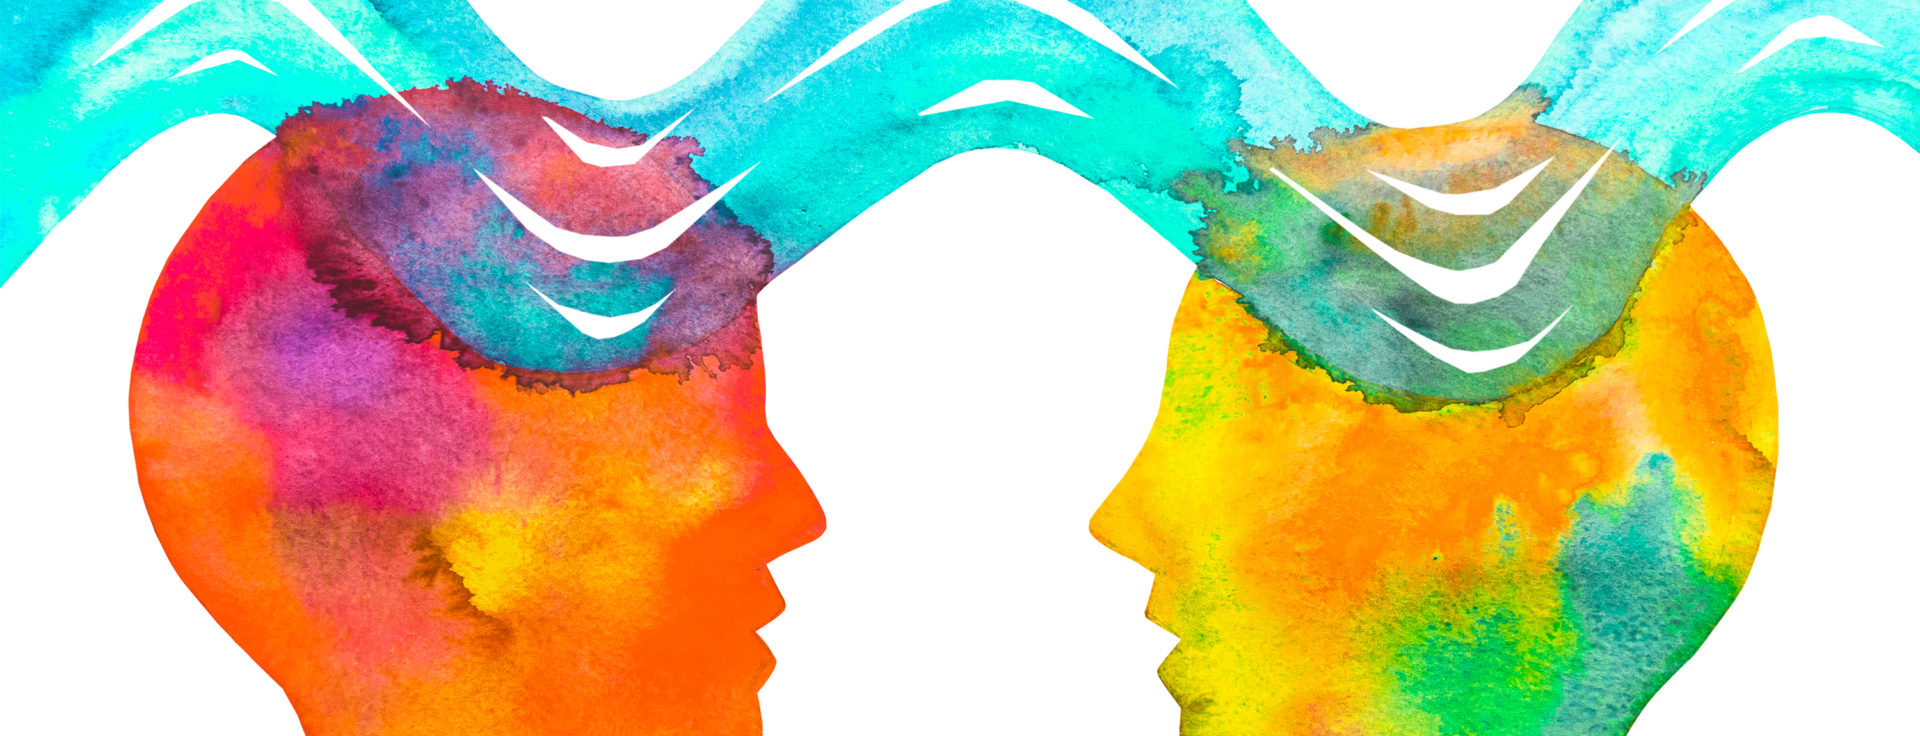 two watercolored heads connected by watercolor waves